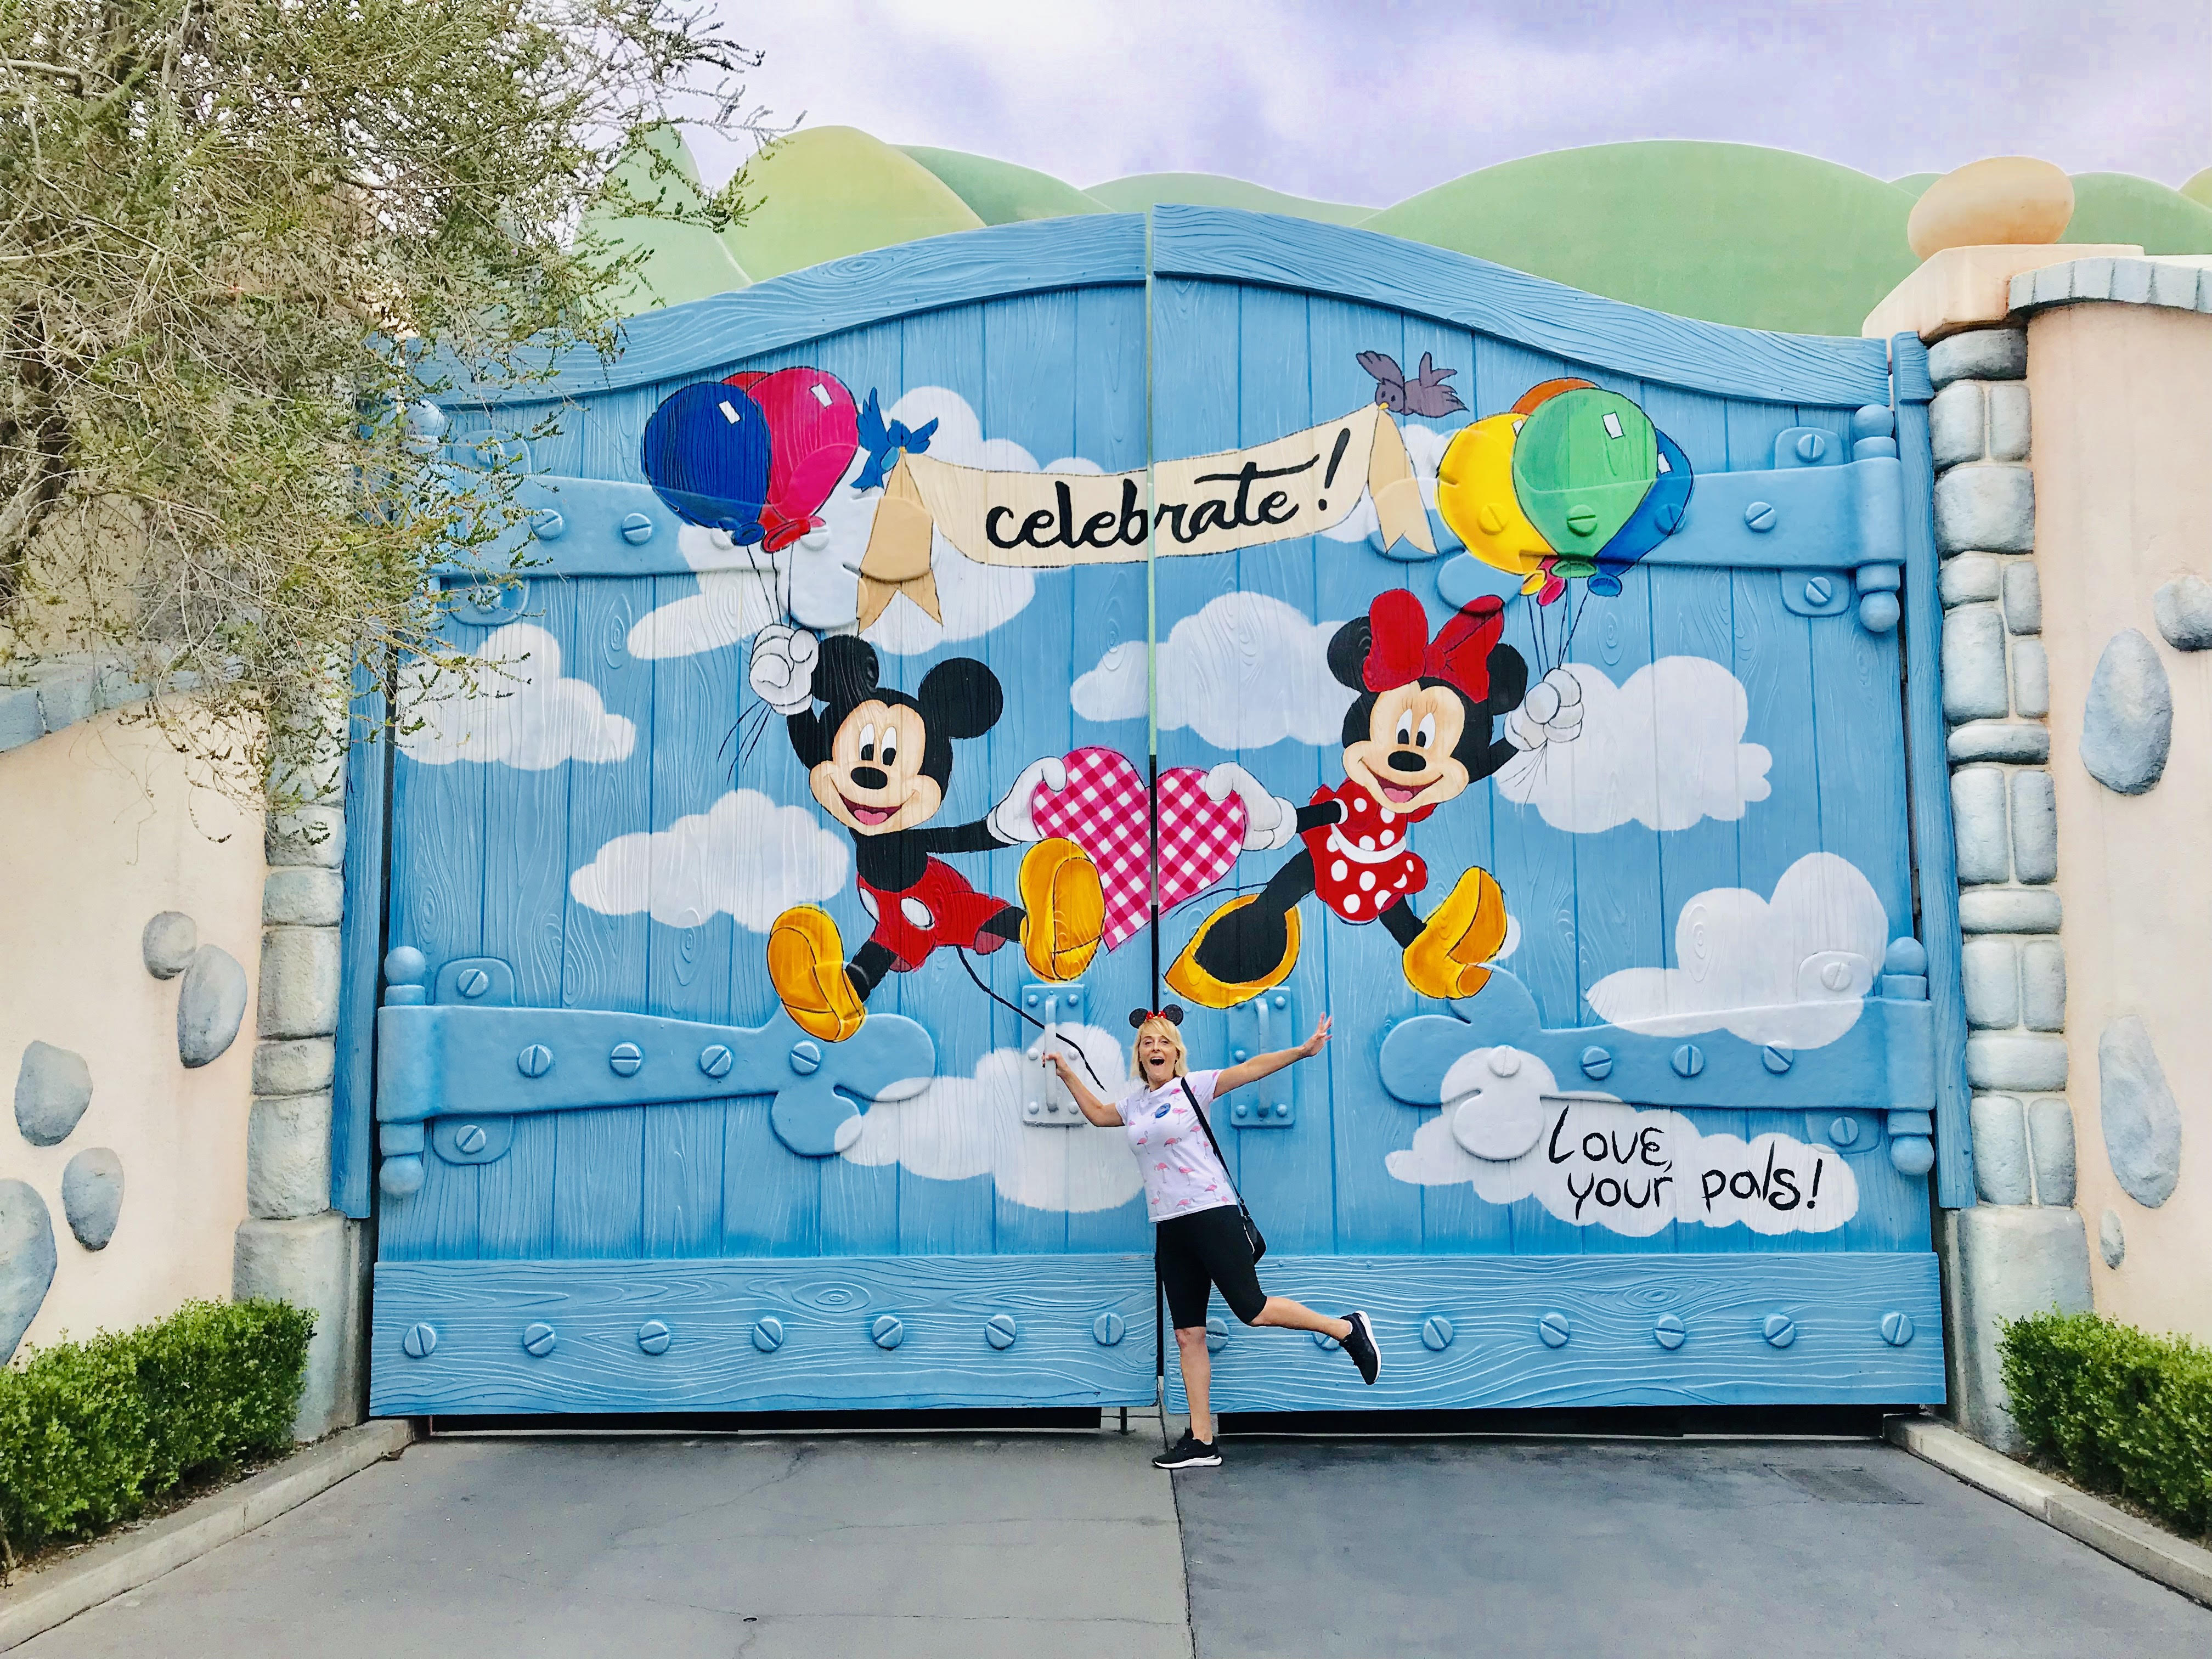 Disneyland on a Budget: tips and tricks for a Disneyland Family Vacation under $1000 featured by top US Disney blogger, Marcie and the Mouse: Save money at Disneyland by booking your Disneyland vacation package through Get Away Today.